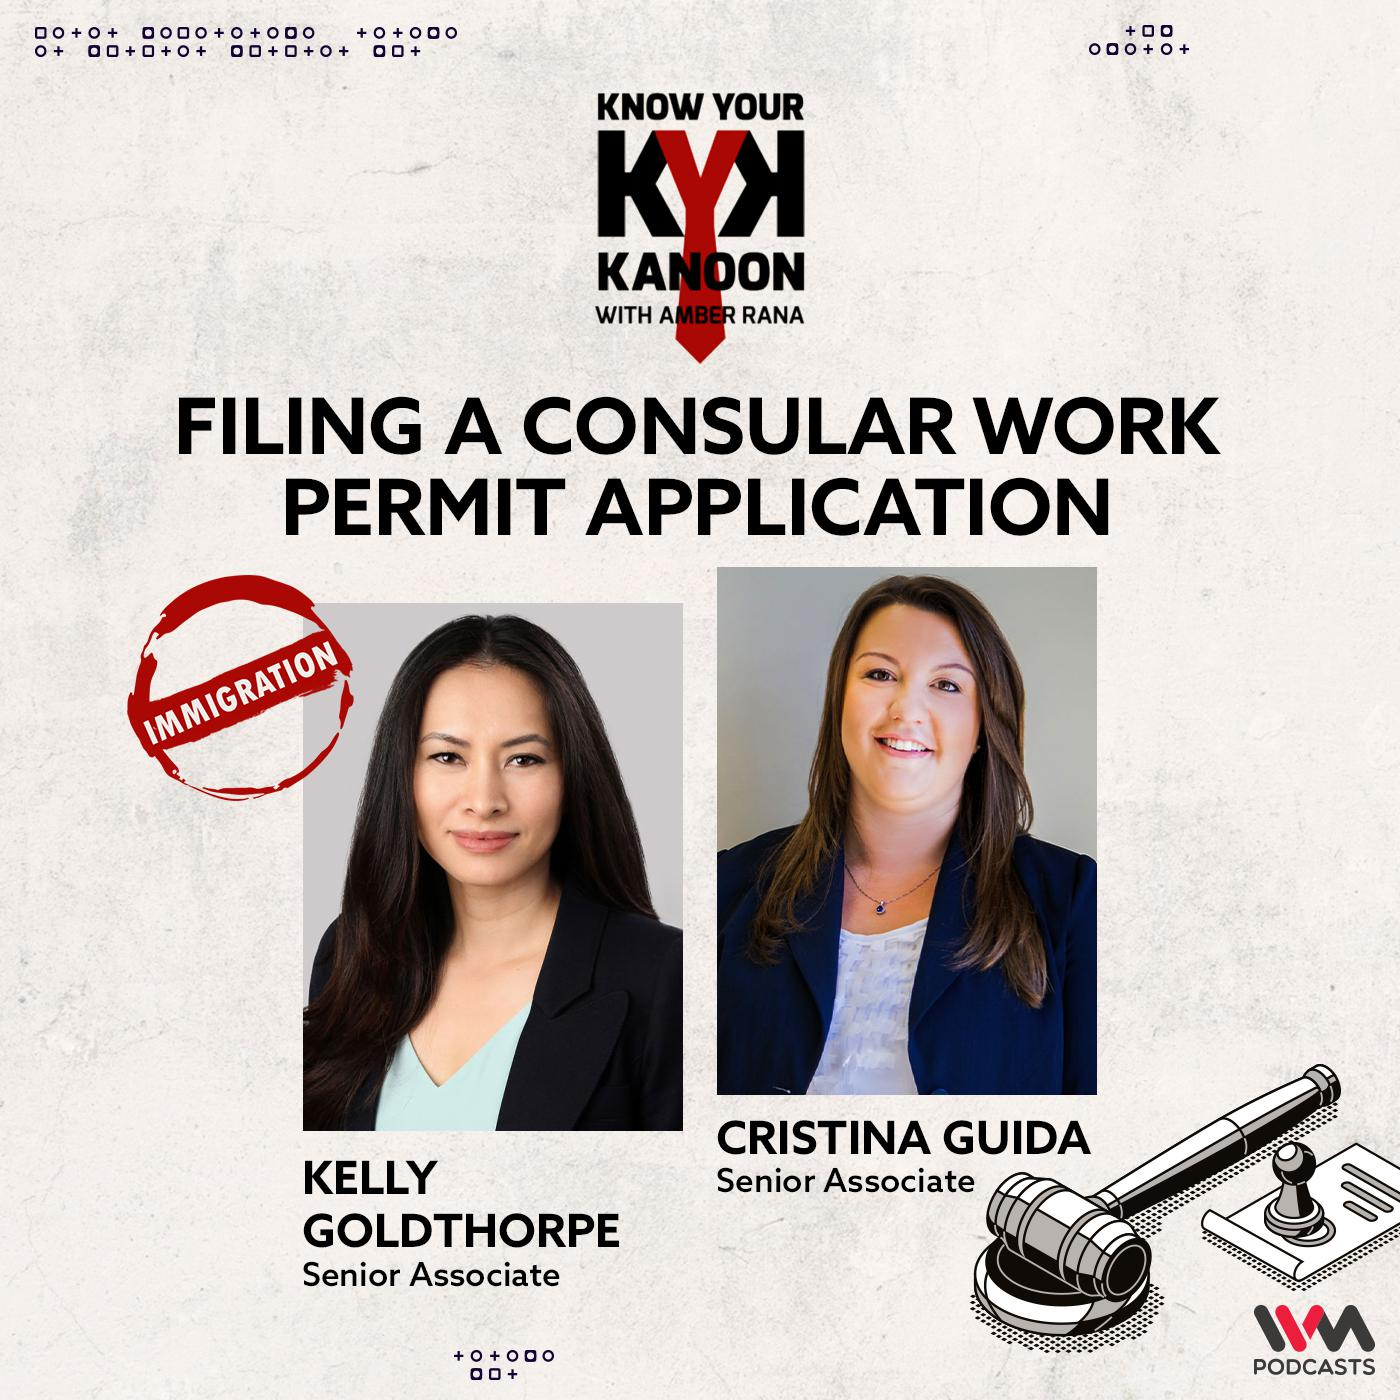 Kelly Goldthorpe and Cristina Guida on filing a consular work permit application